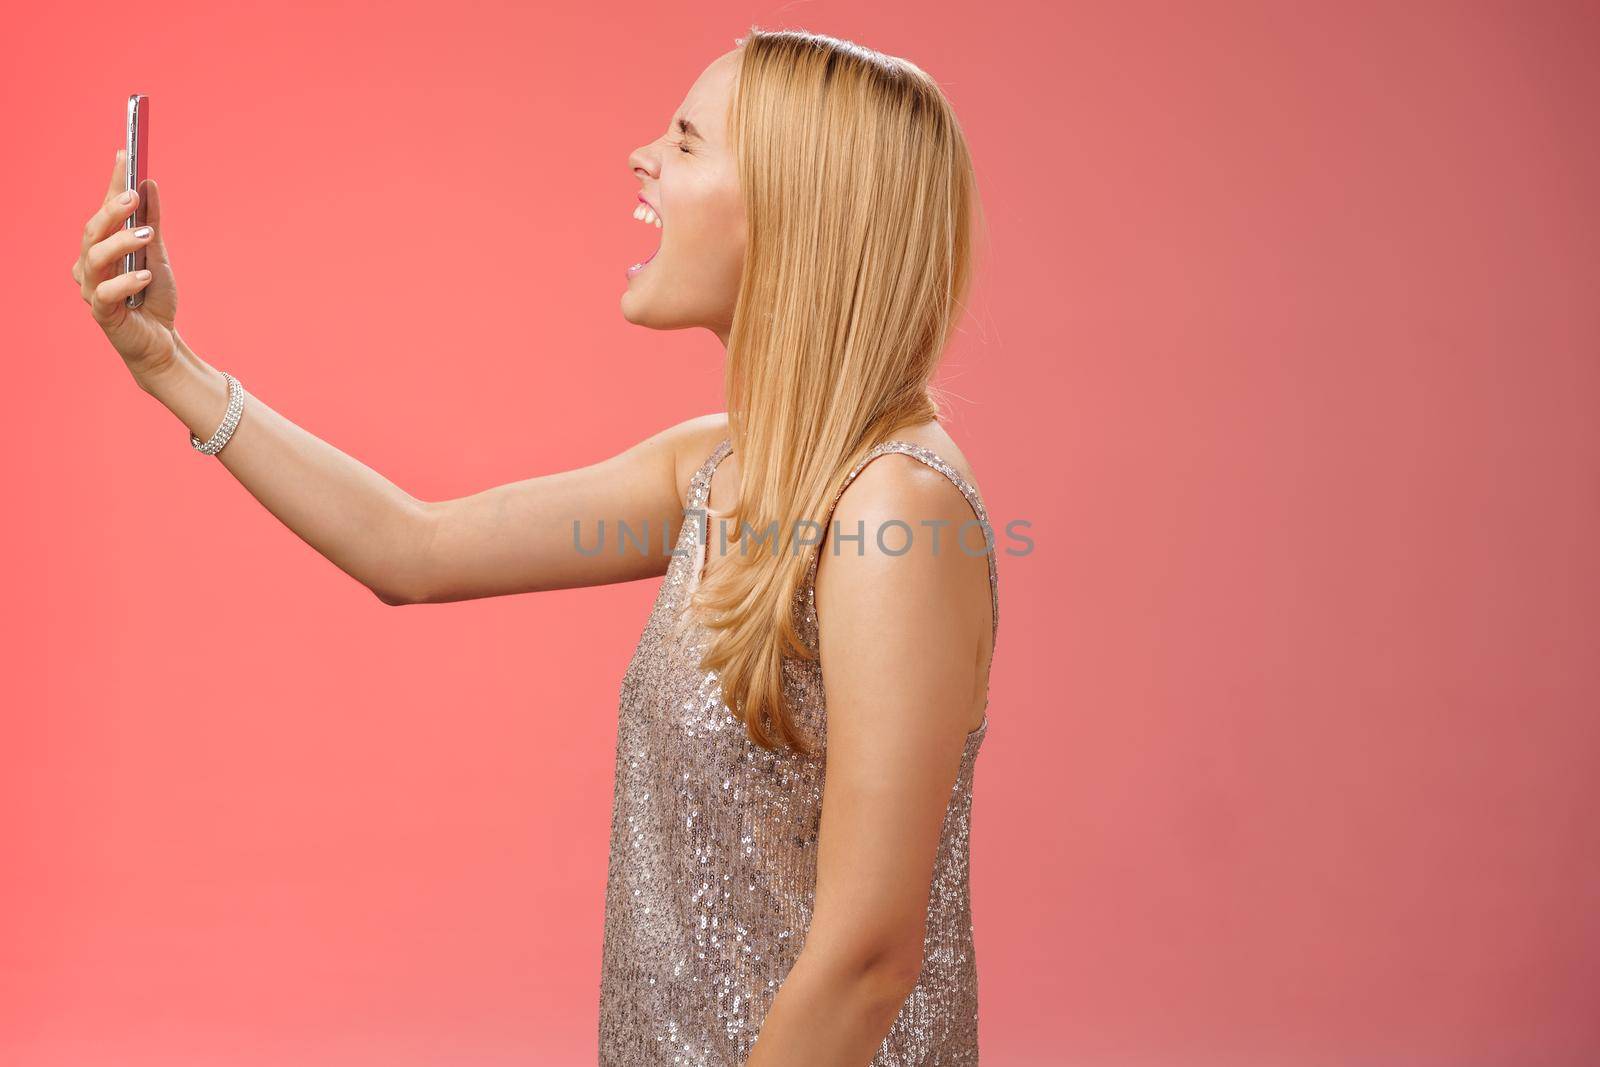 Profile shot funny carefree blond woman hold smartphone raised open mouth wide yelling recording video own shout scream, standing silver glamour dress near red background fool around.